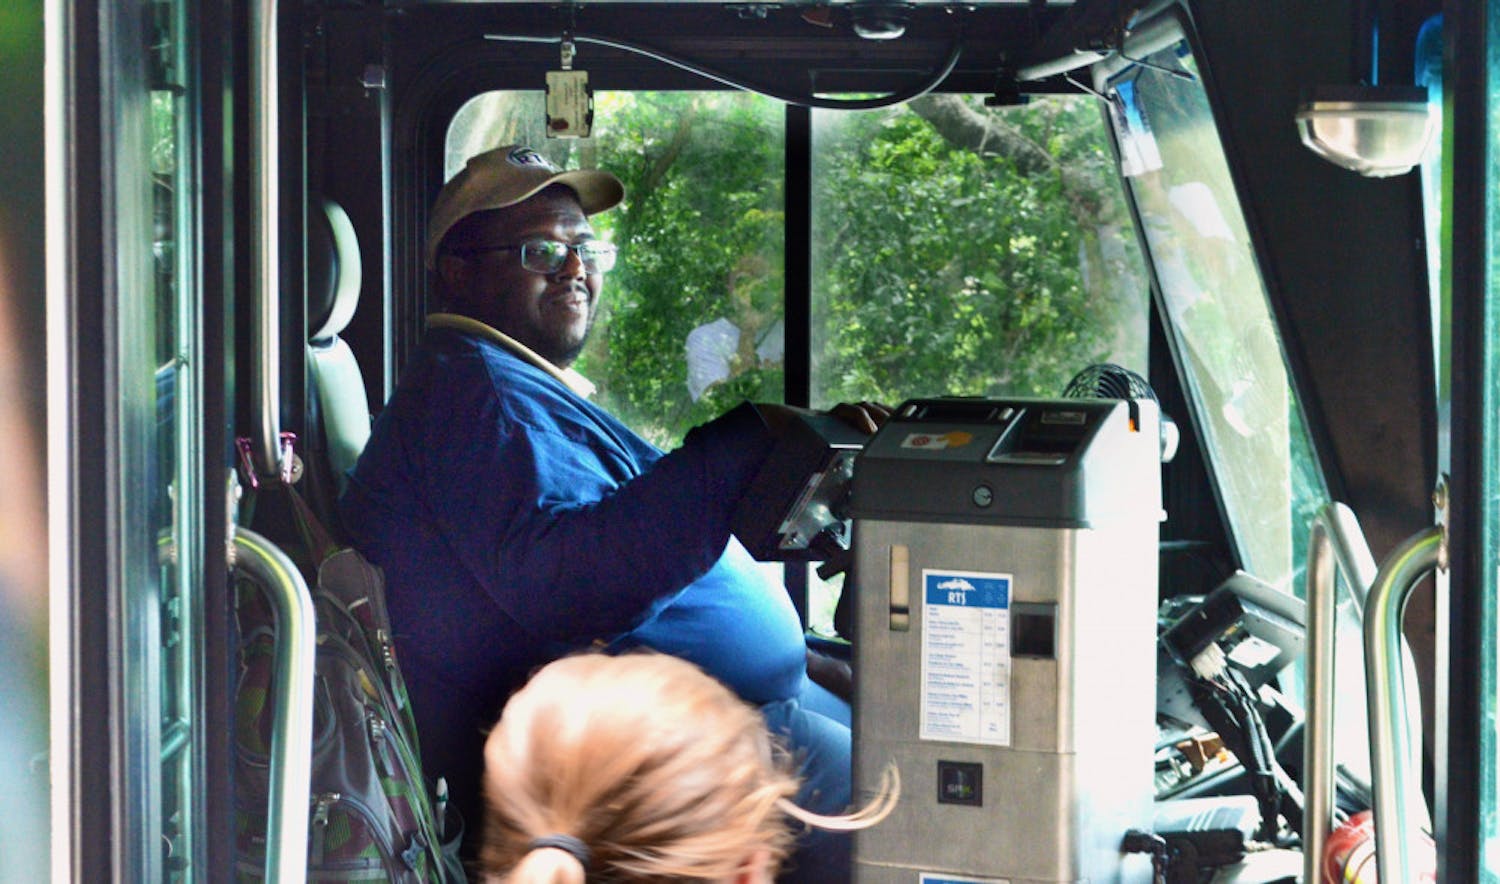 Desmond Grimes, 38, welcomes students onto the 117 Bus at the Reitz Union. Grimes’ route, “Park-N-Ride 2,” circulates through 34th Street back to the Reitz Union.   